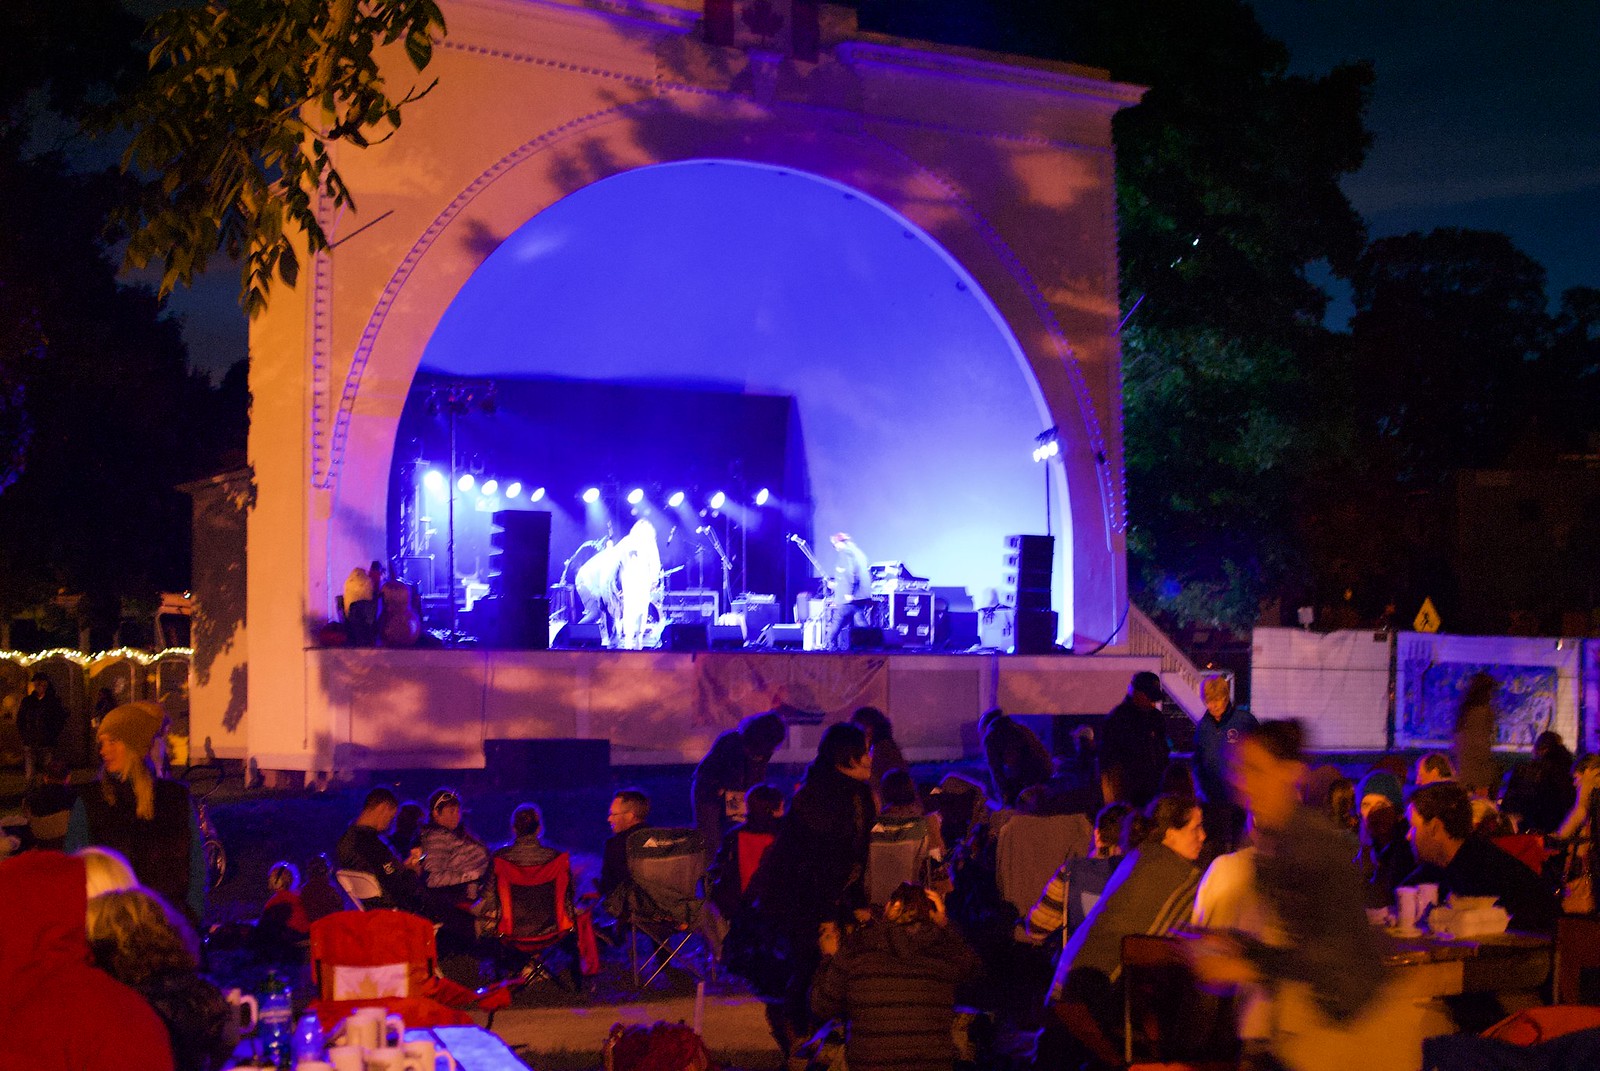 Bandshell performances at Cultivate